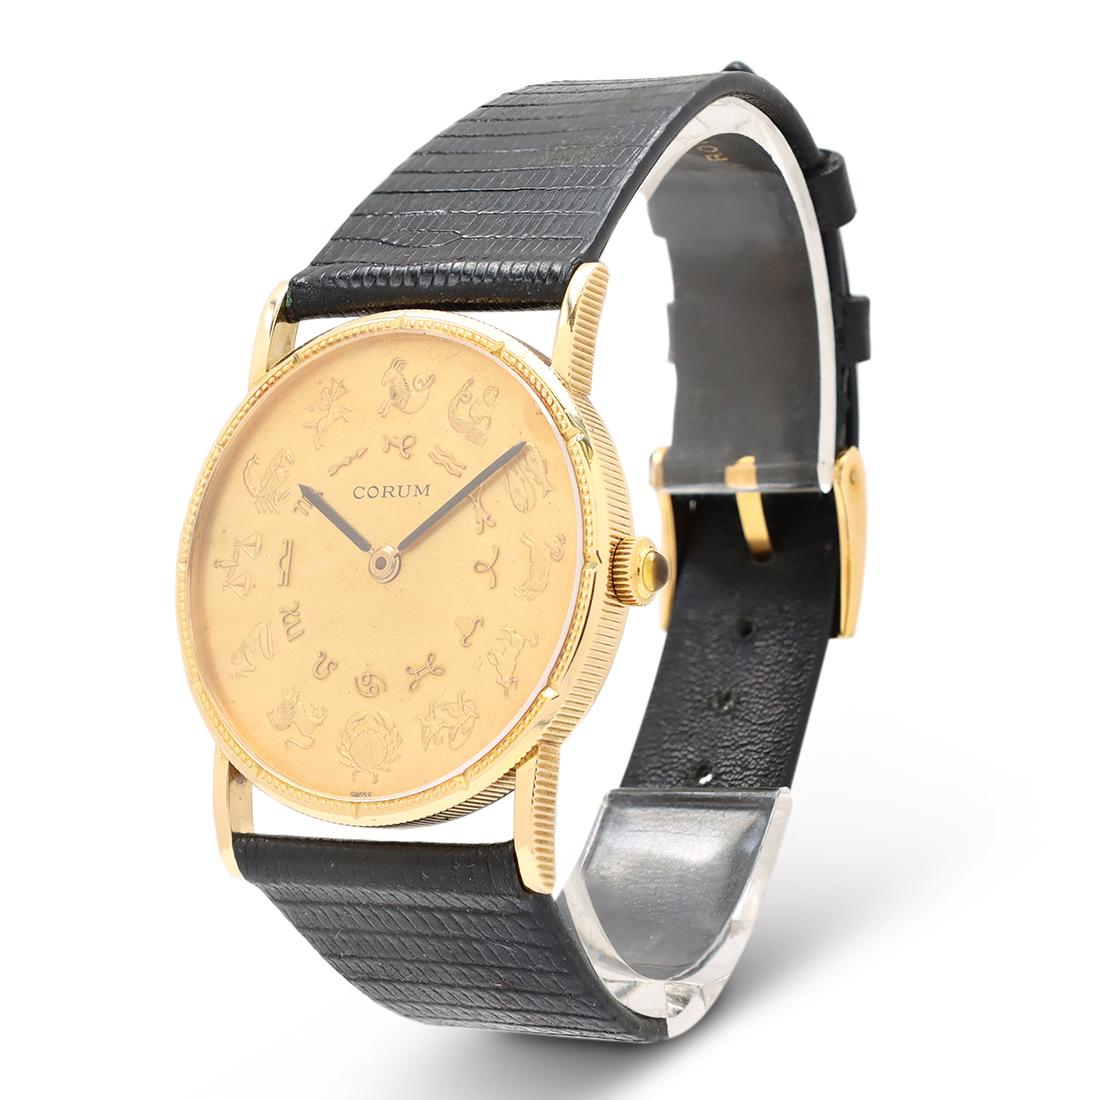 Authentic vintage Corum Astrological wristwatch crafted in 18 karat yellow gold. Distinctive astrological constellations are featured on the outer track of dial with zodiac symbols on the inner track. Alternating hobnail bezel, coin-edge case, and